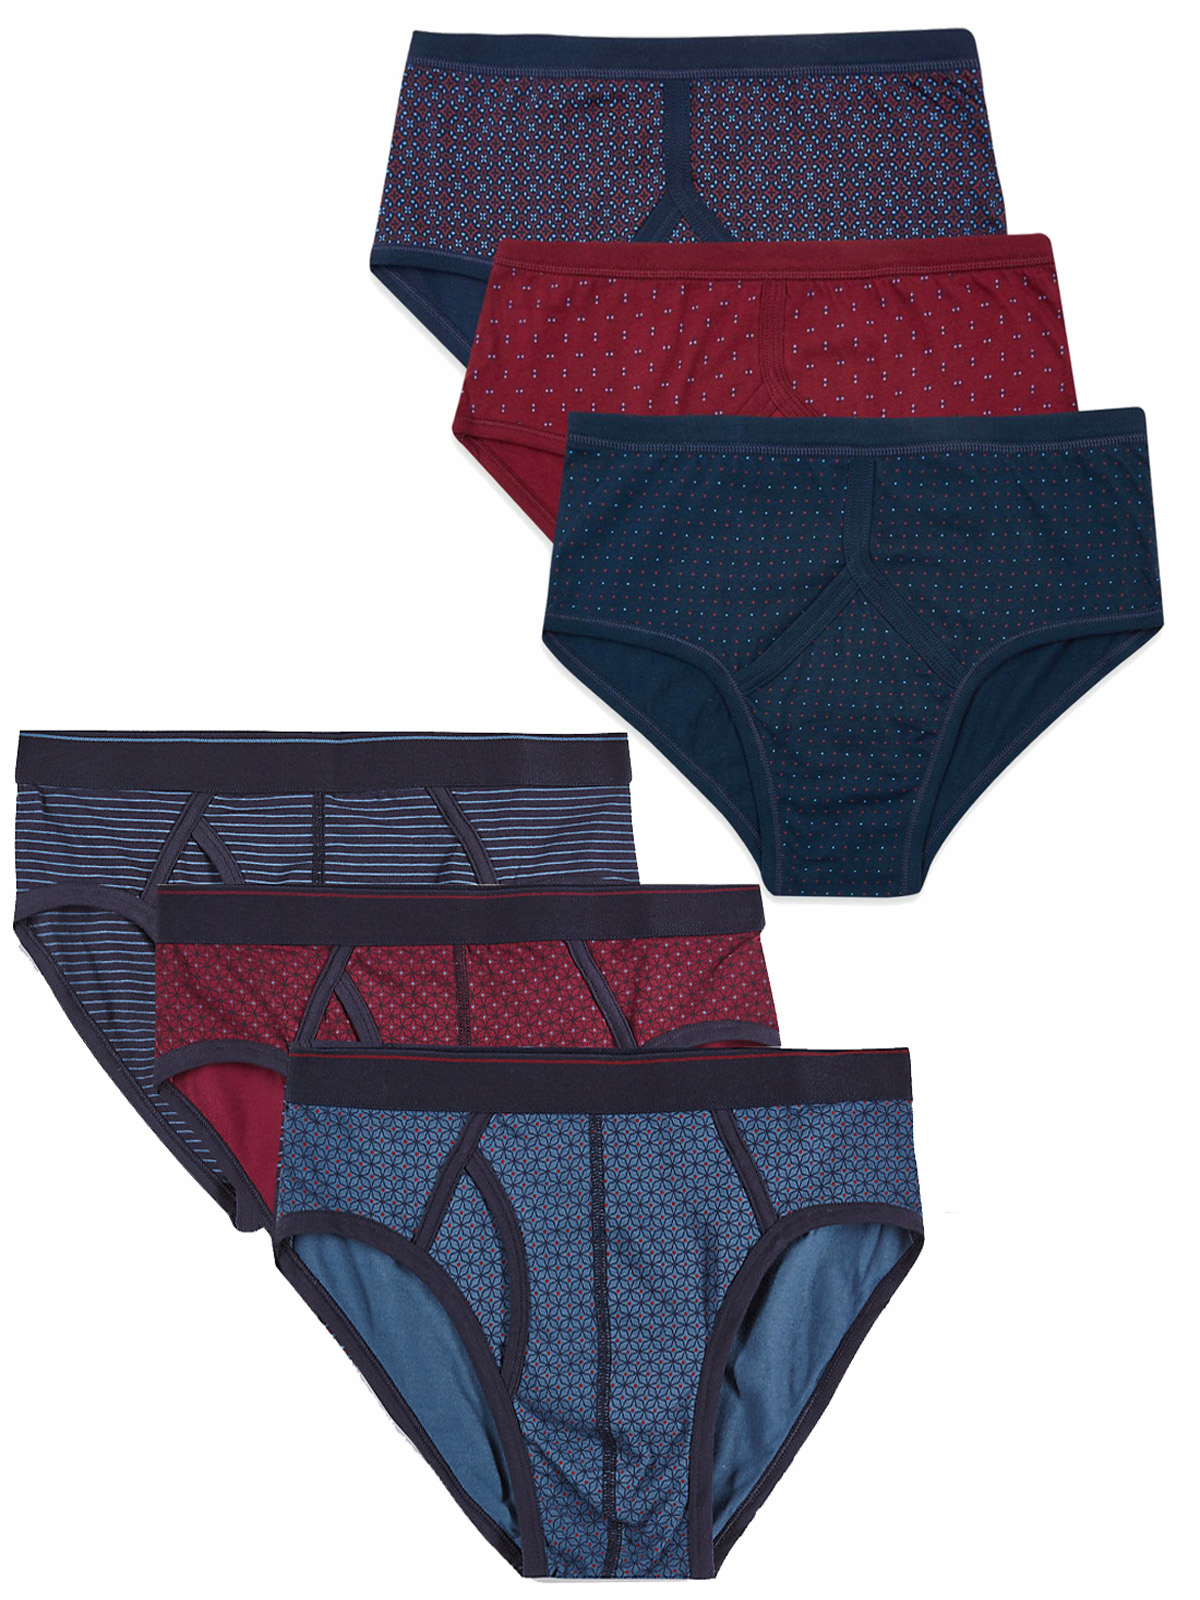 Marks and Spencer - - M&5 ASSORTED Mens Printed Cotton Briefs - Size XLarge